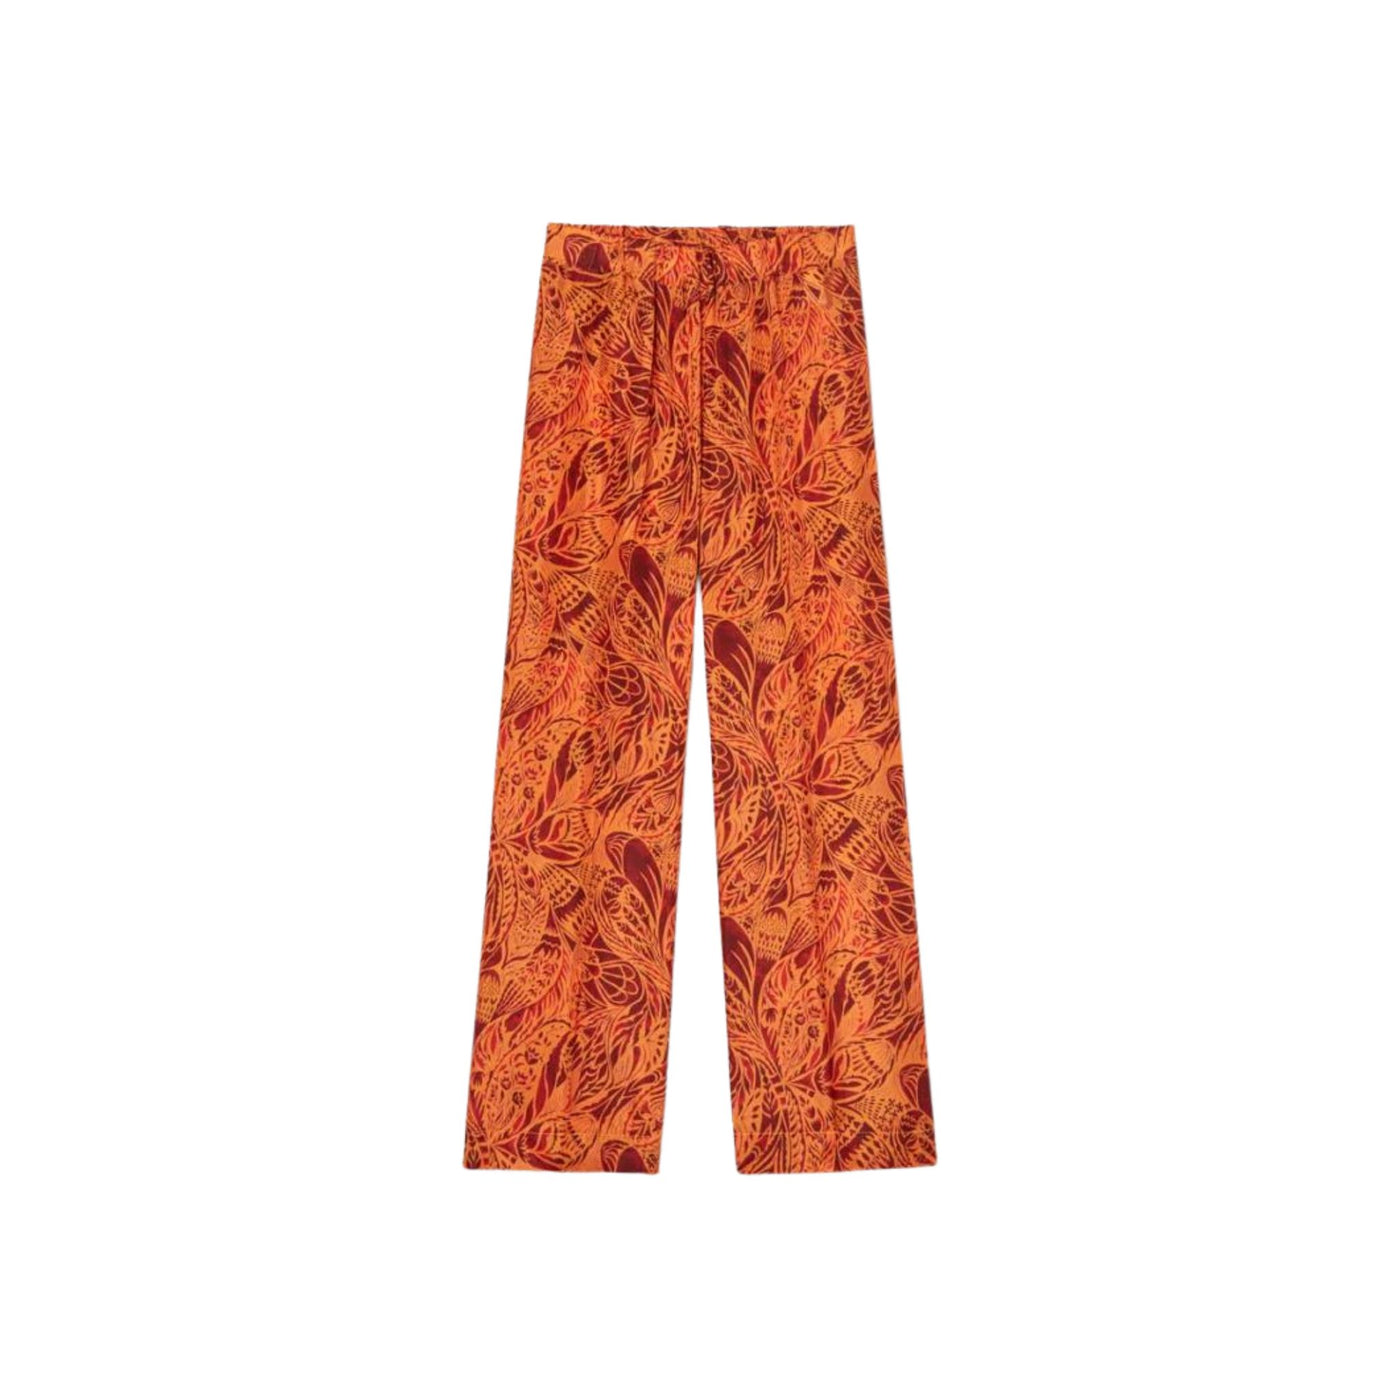 Women's trousers with flared leg